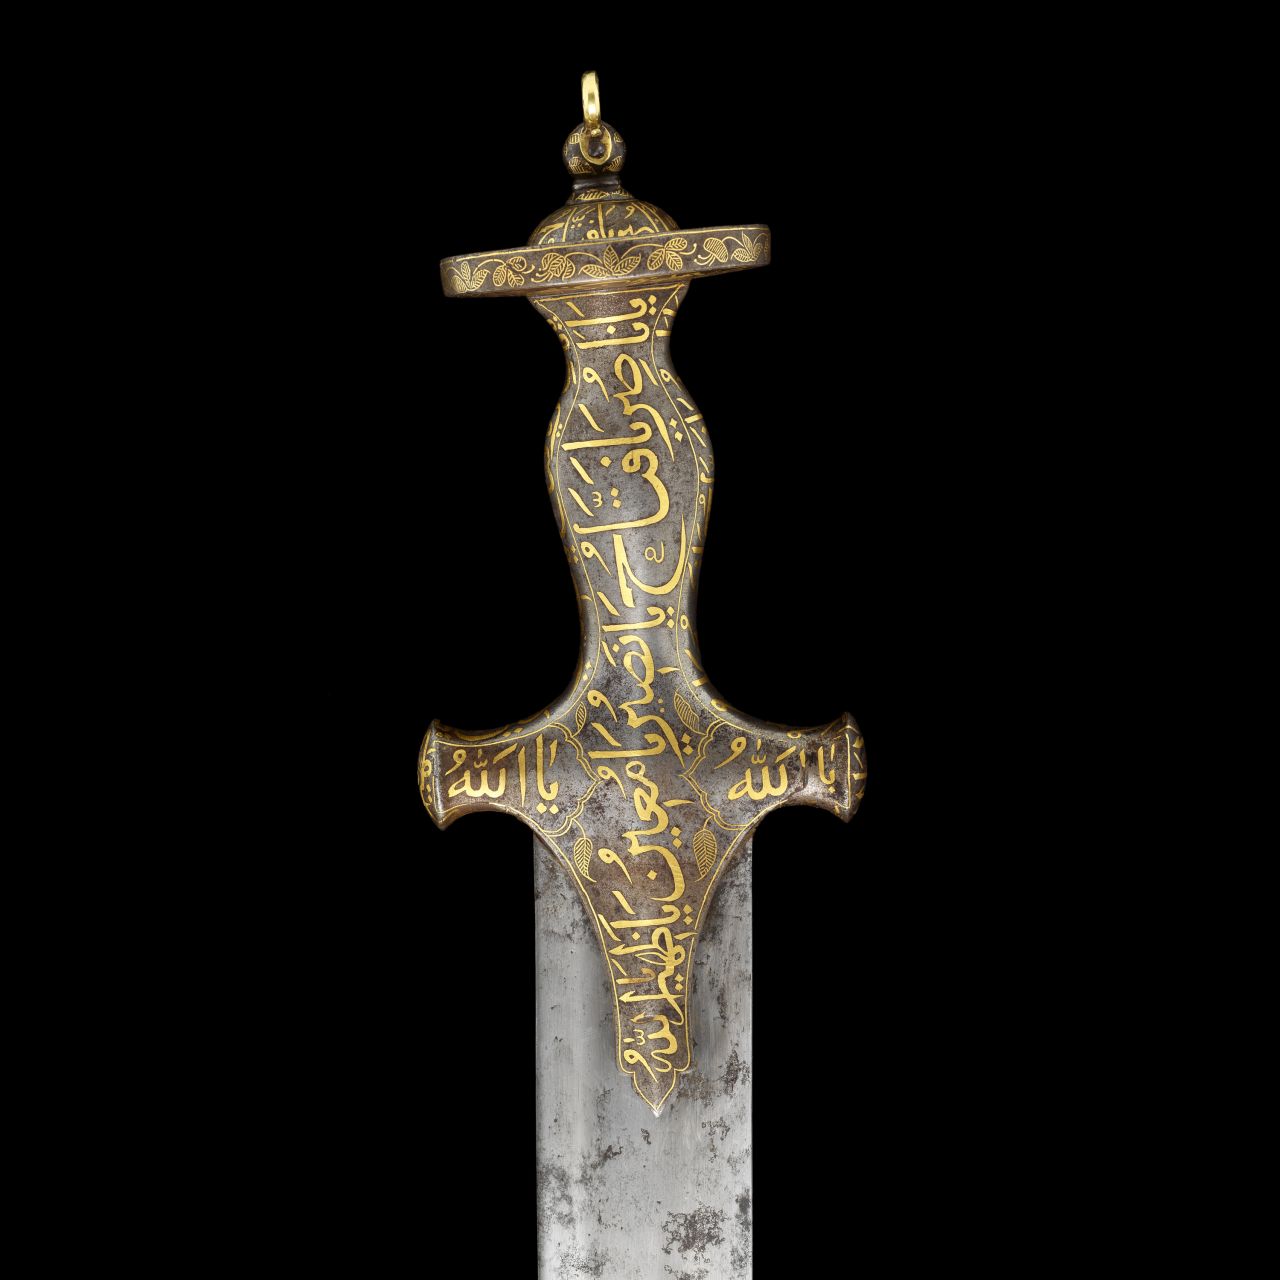 The hilt of the sword is decorated with fine gold calligraphy. 